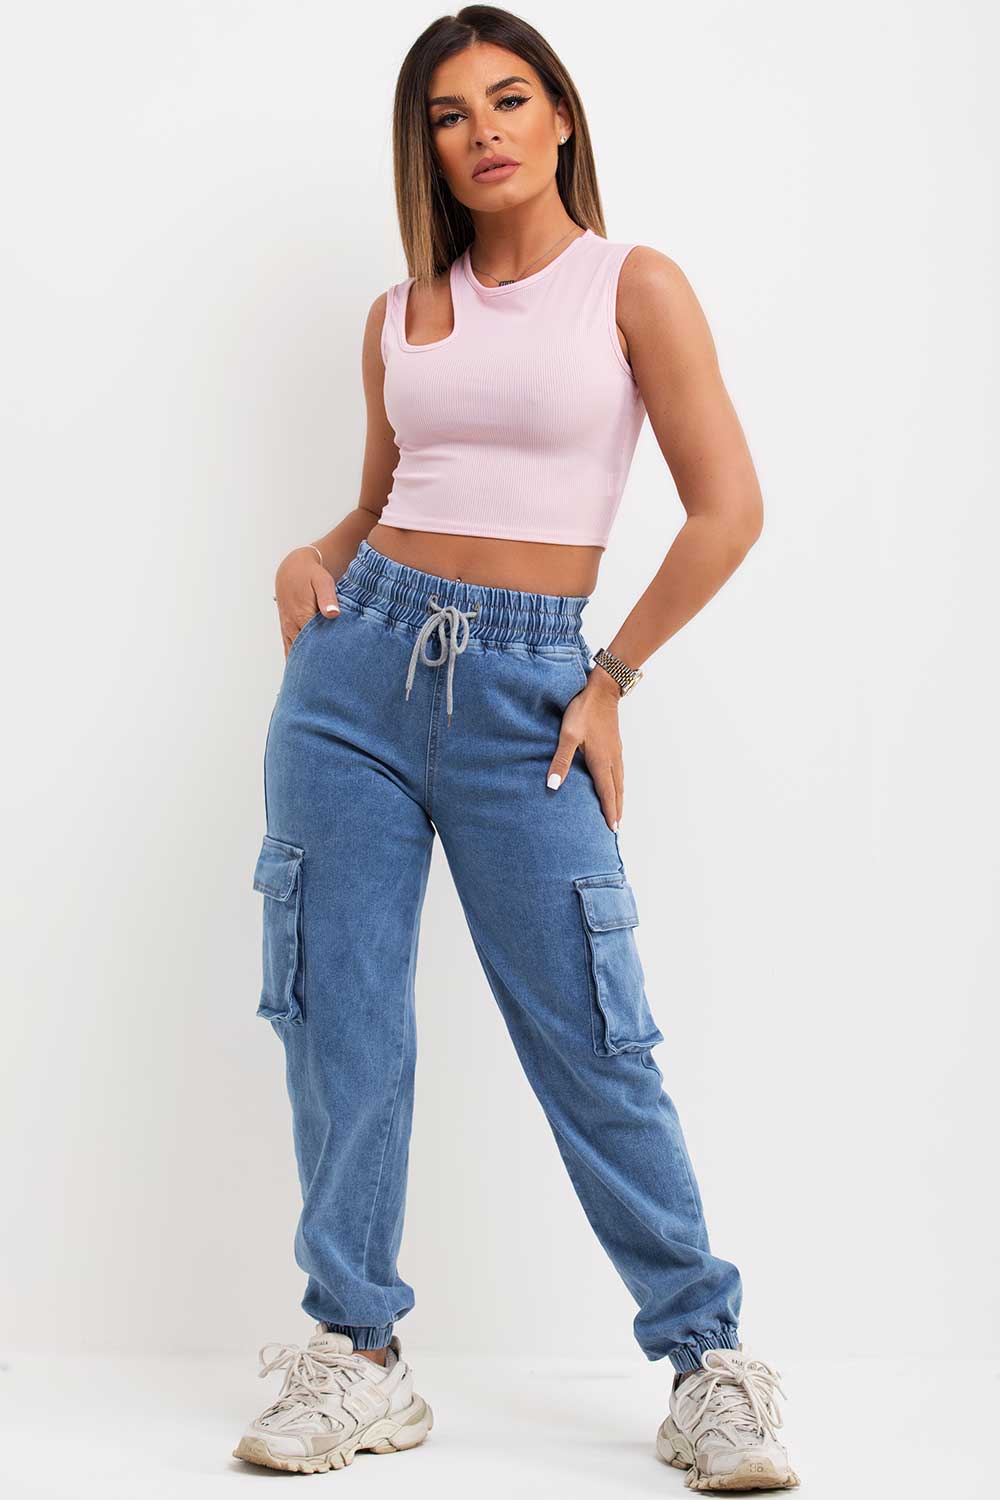 ribbed crop top with cut out shoulder